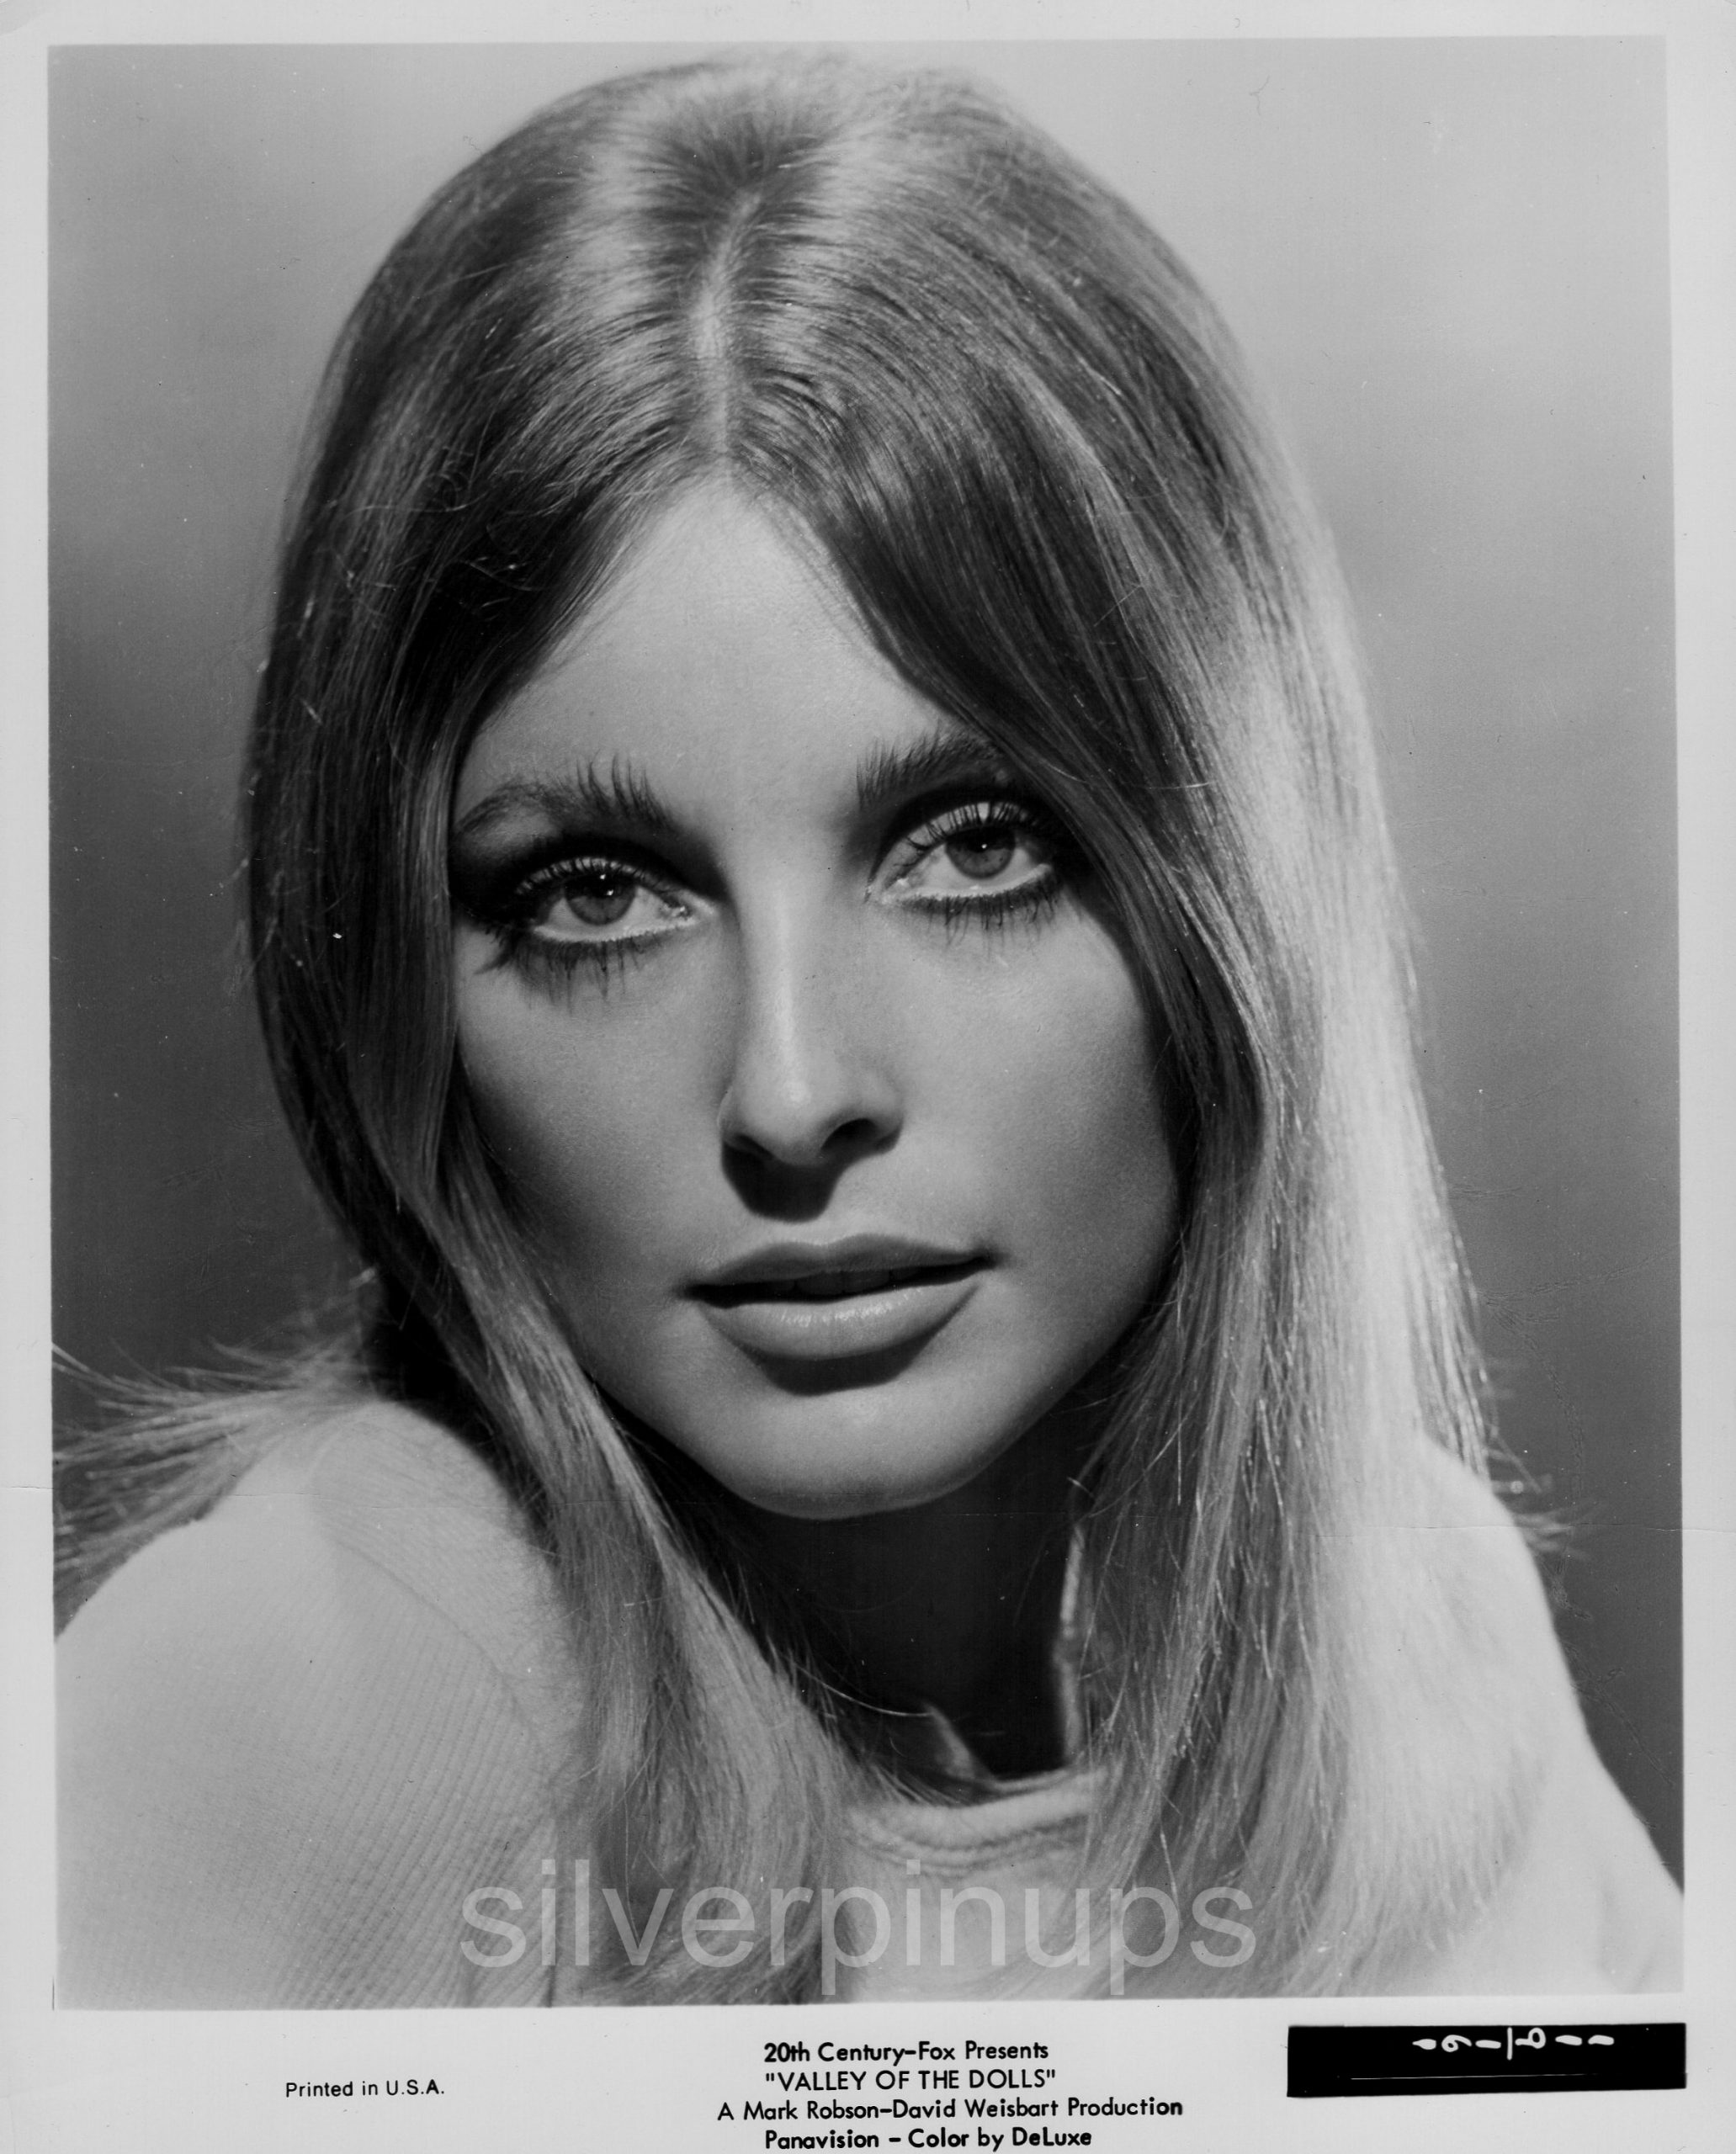 Orig 1967 SHARON TATE Iconic Beauty.. “VALLEY OF THE DOLLS” Portrait ...